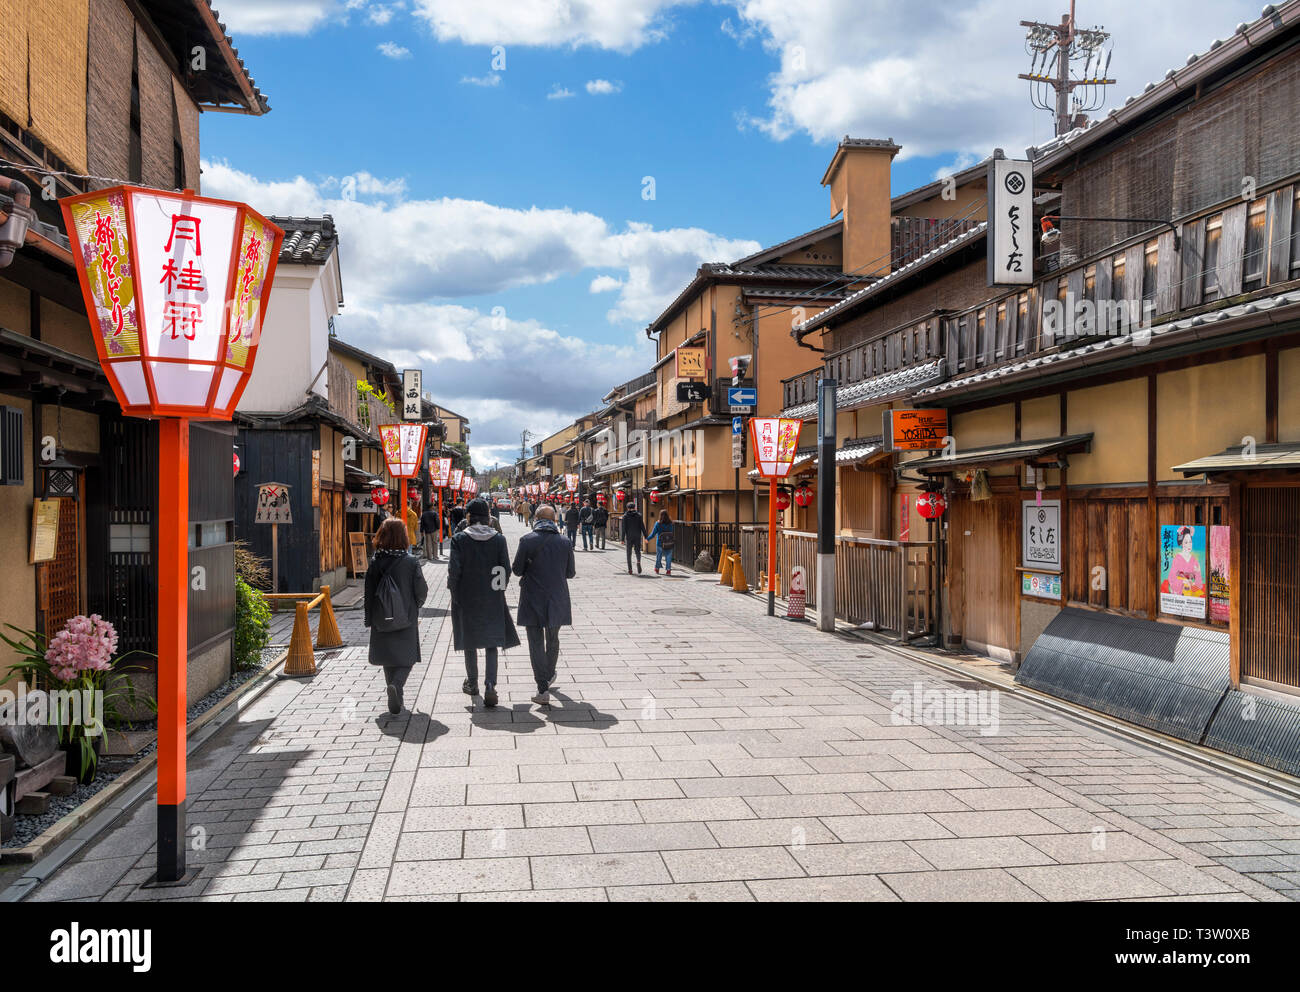 Traditional Japanese buildings on Hanamikoji-dori, a street in the historic Gion district of Kyoto, Japan Stock Photo